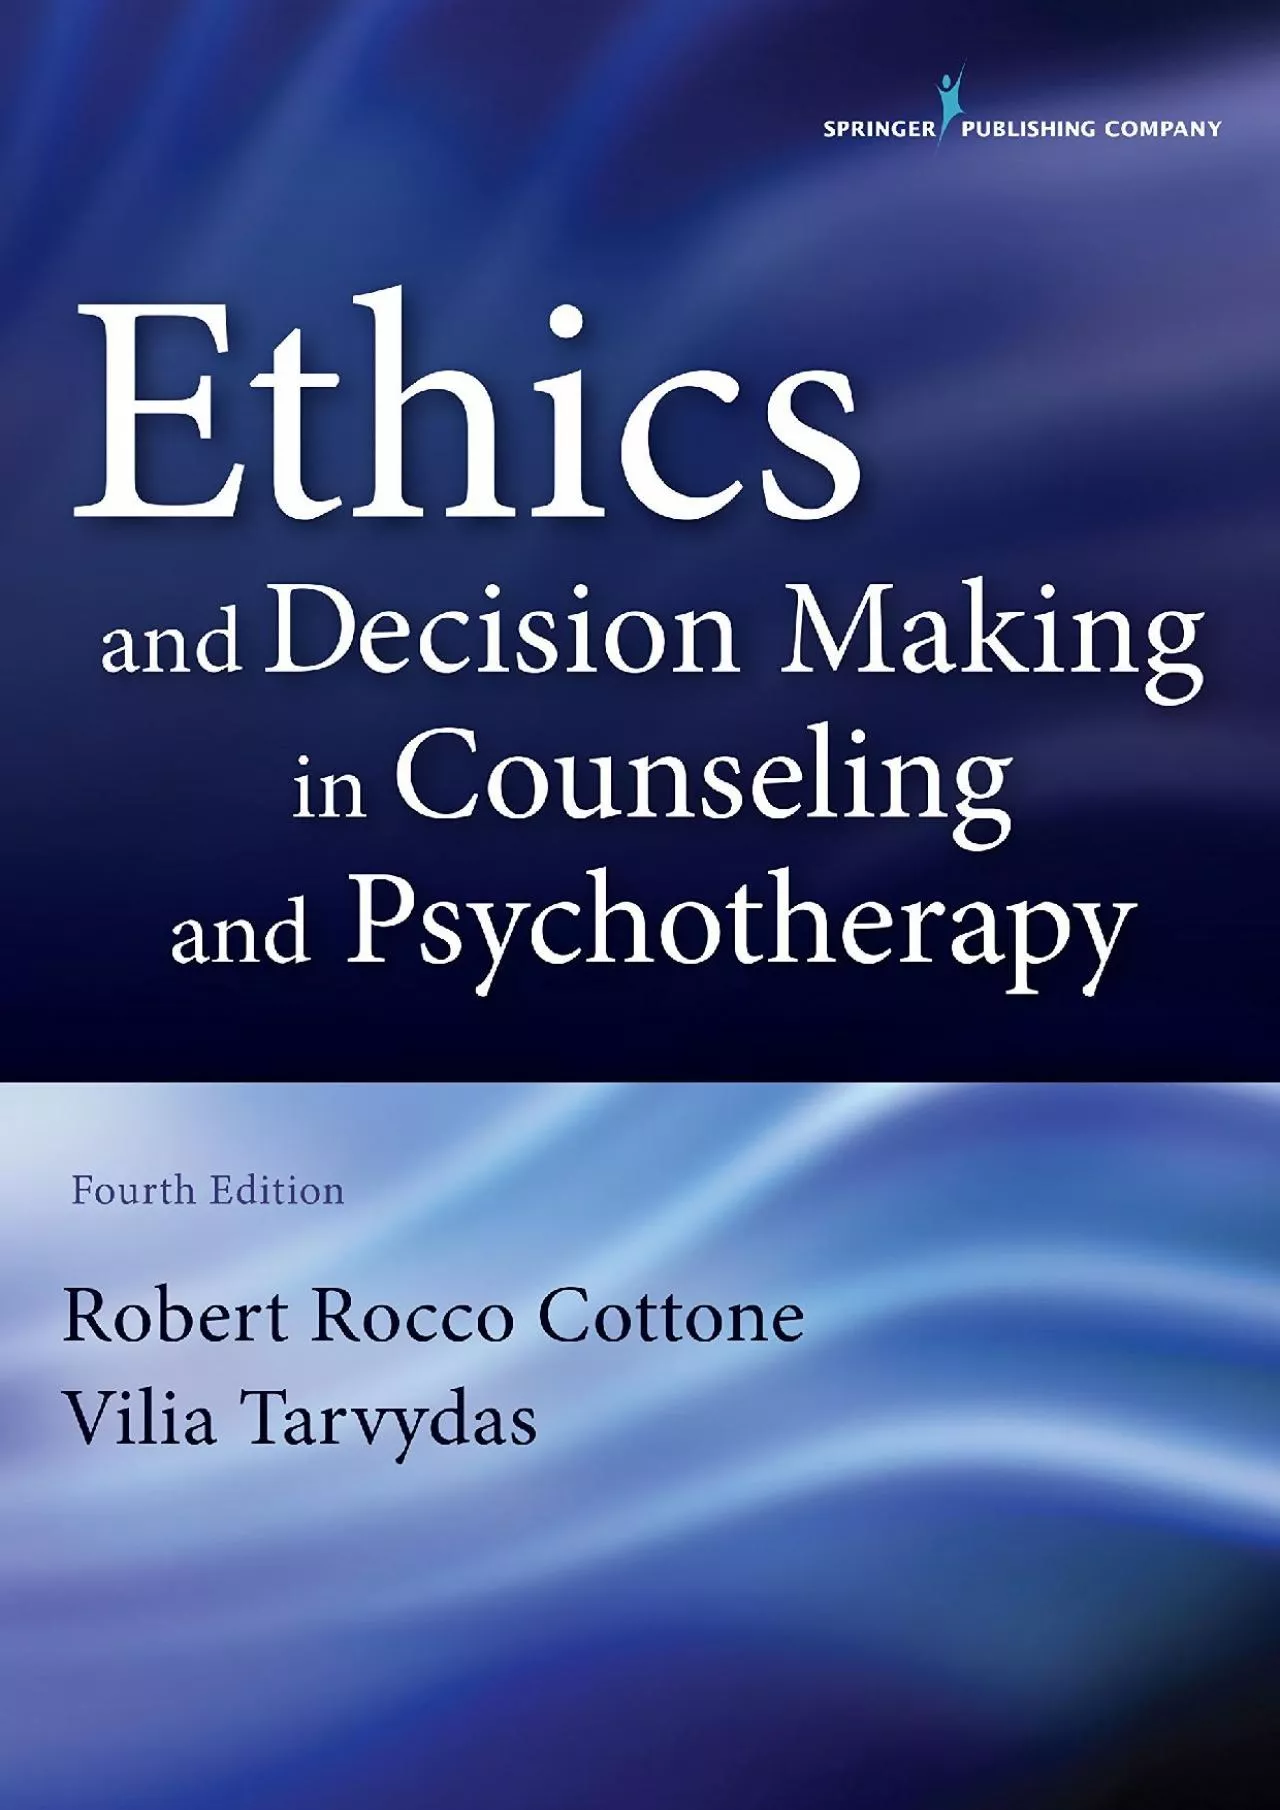 (EBOOK)-Ethics and Decision Making in Counseling and Psychotherapy, Fourth Edition